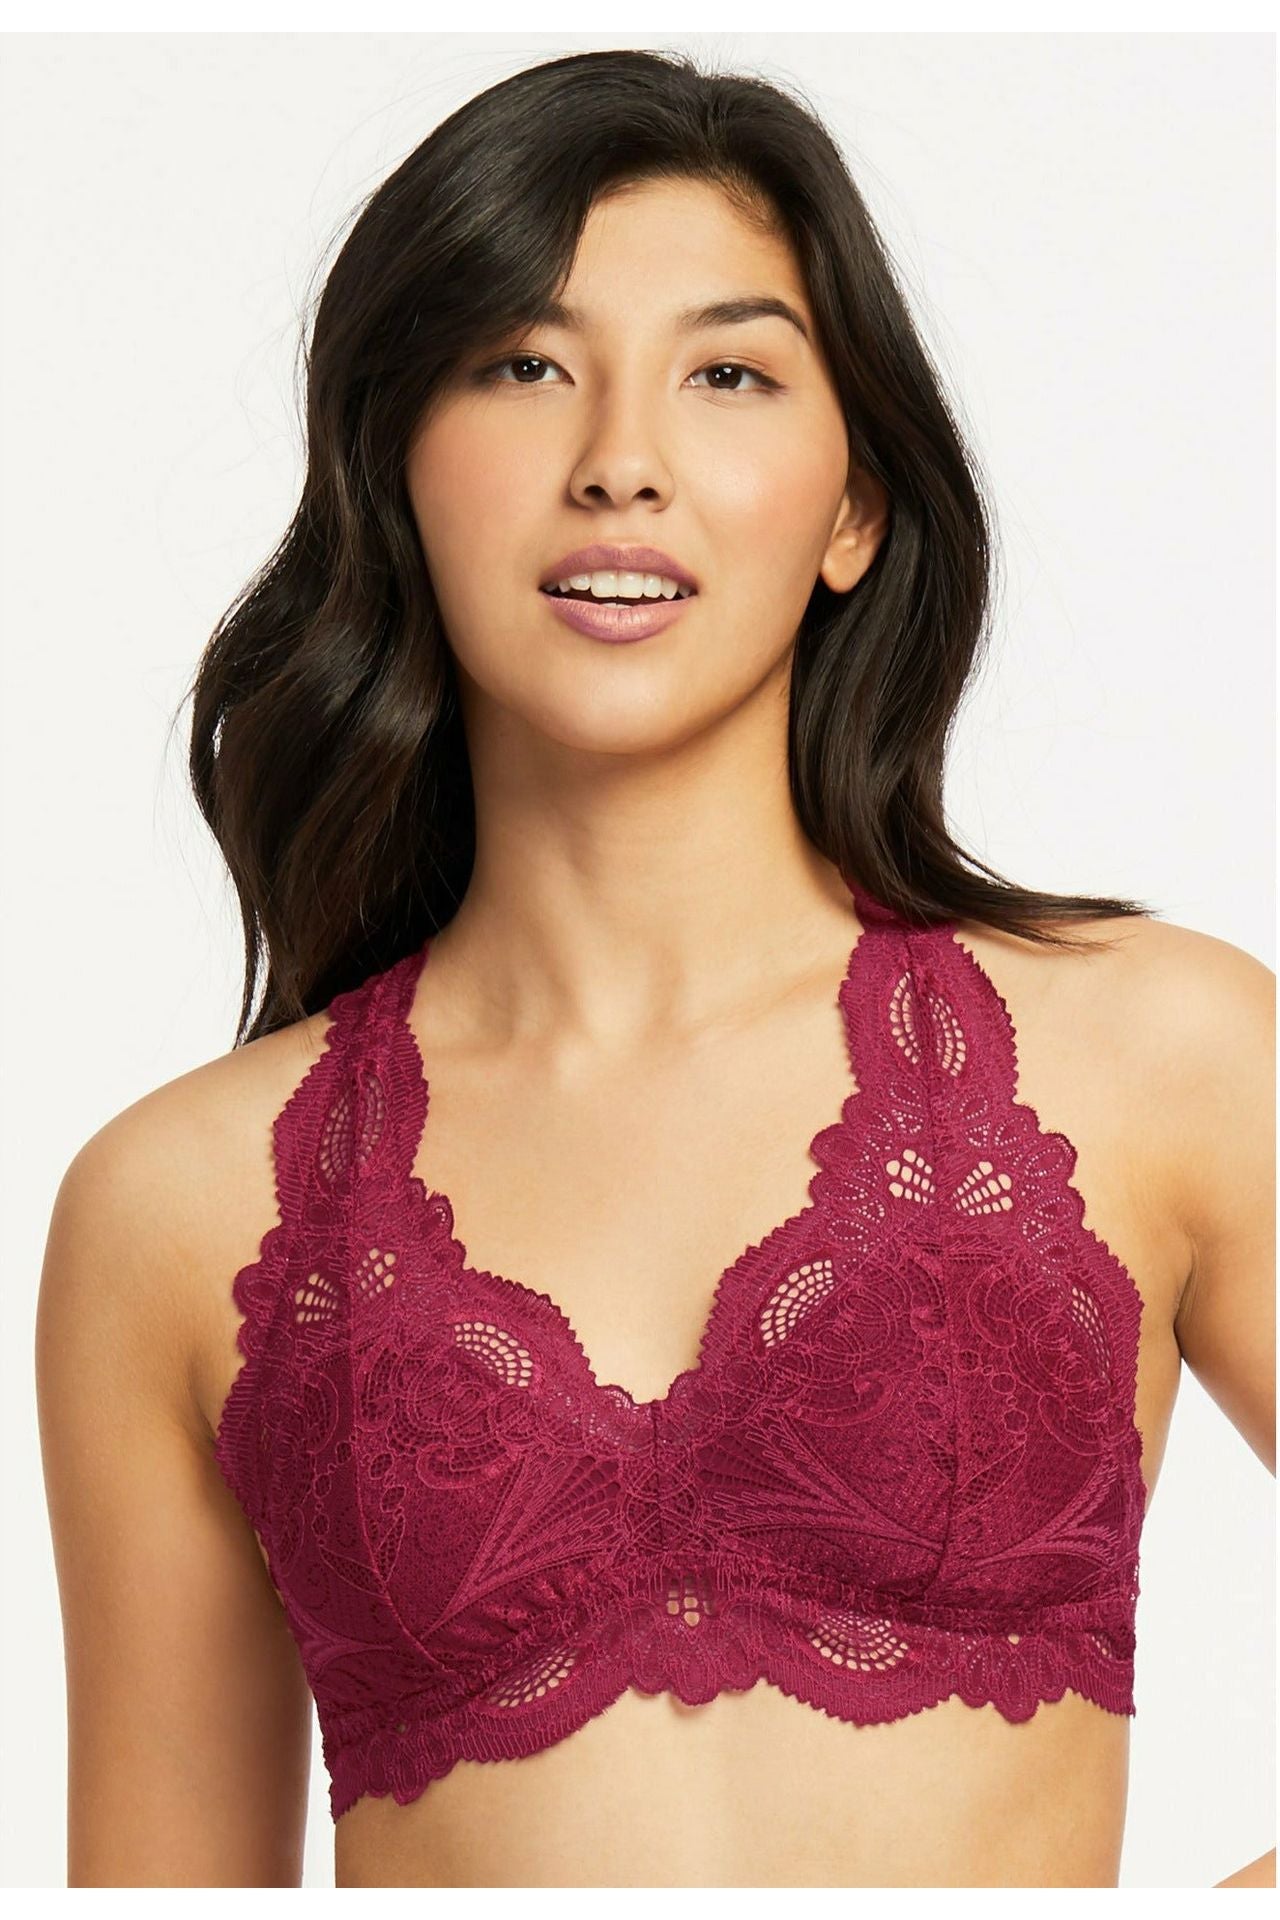 Fleur't Belle Epoque Lace T-Back Bralette in Champagne - Busted